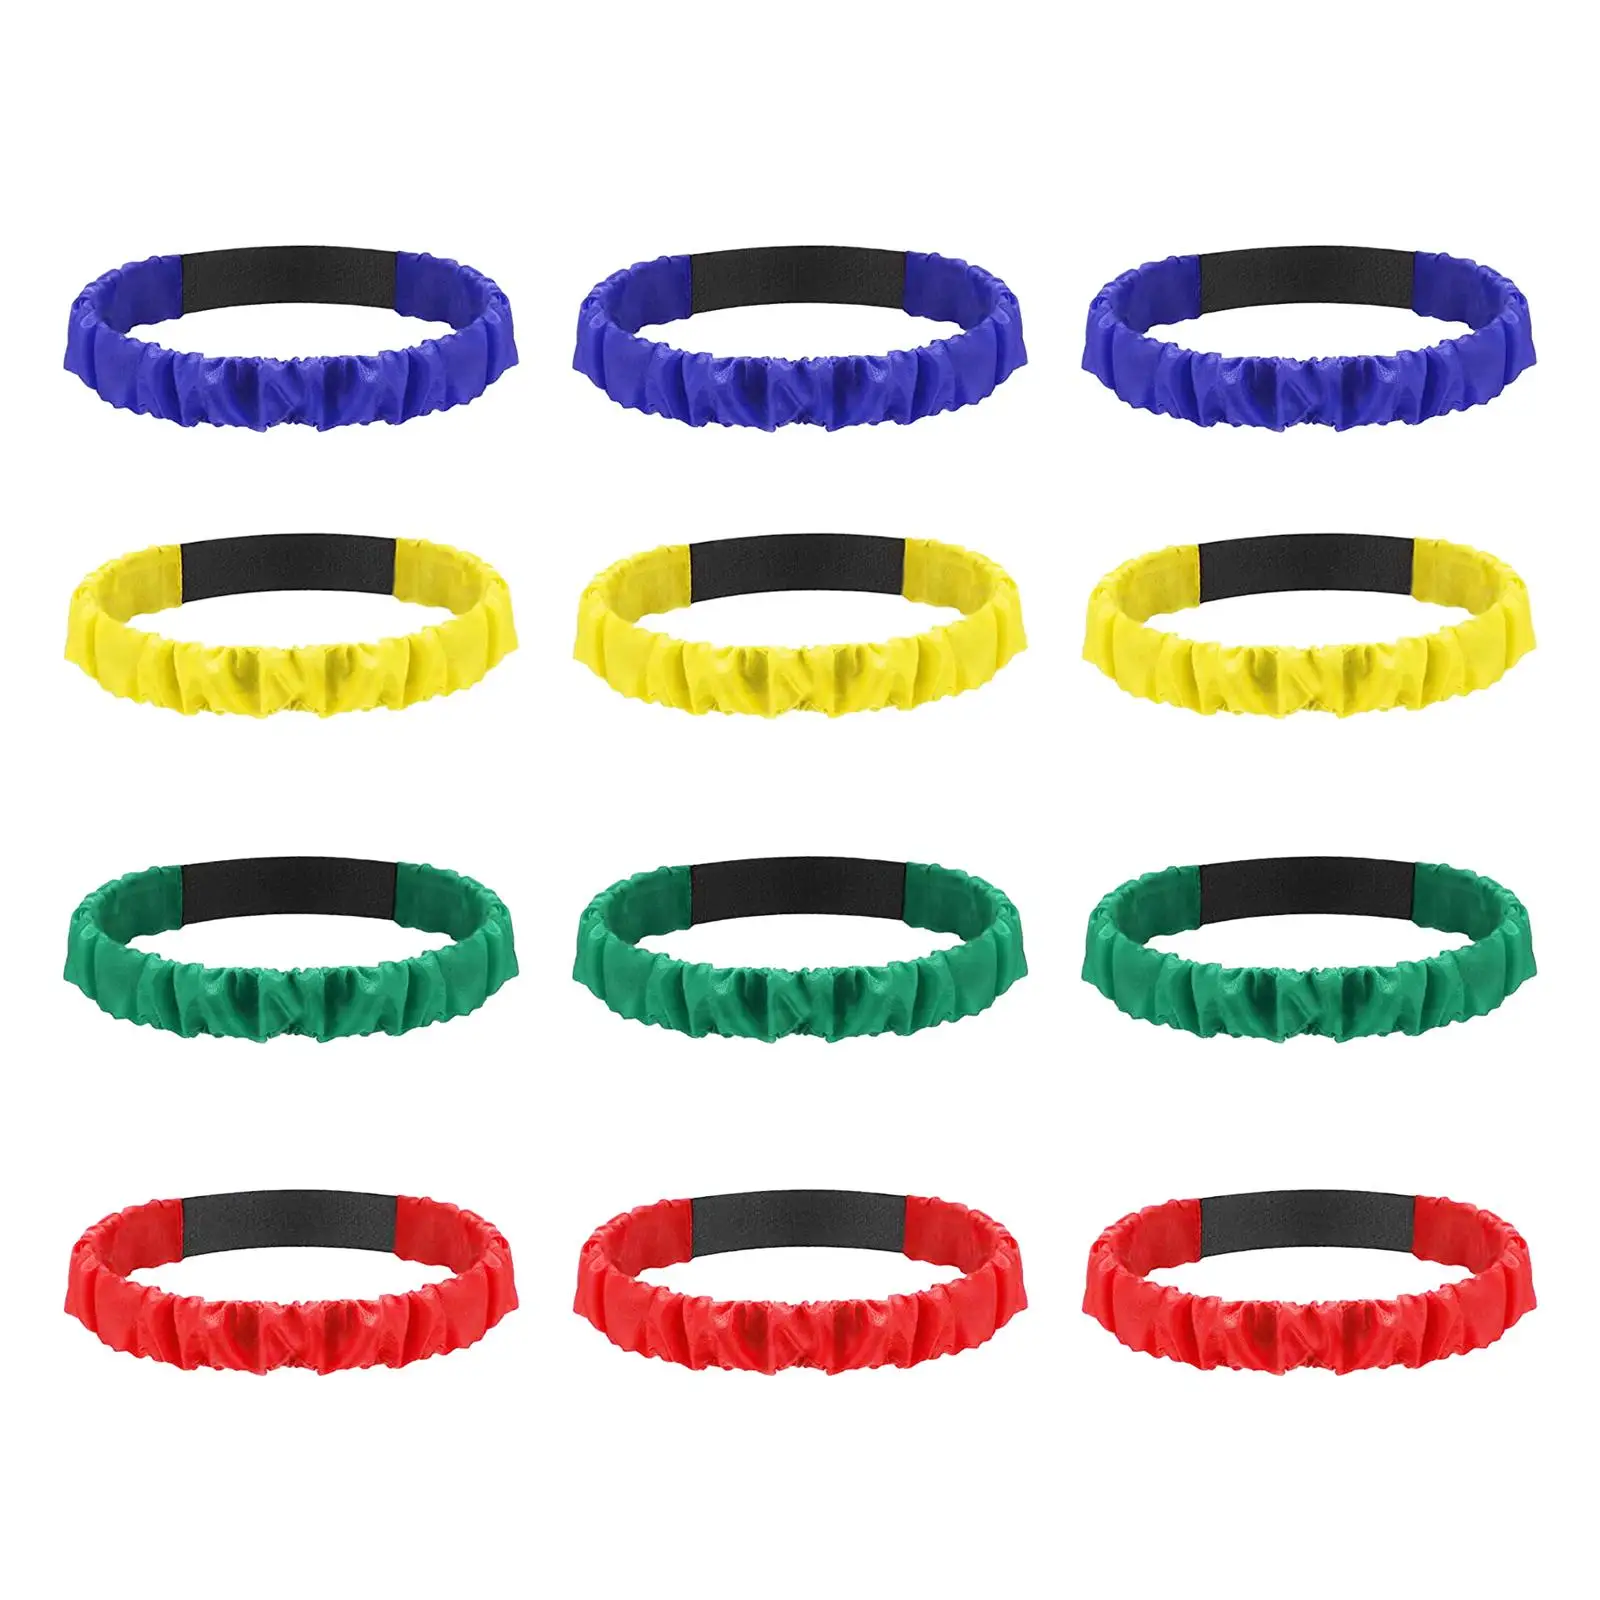 12Pcs Race Legged Band Elastic Tie Strap Kids Party Supplies Field Day Games Adult Teens Legged Race Band 3 Legged Race Band